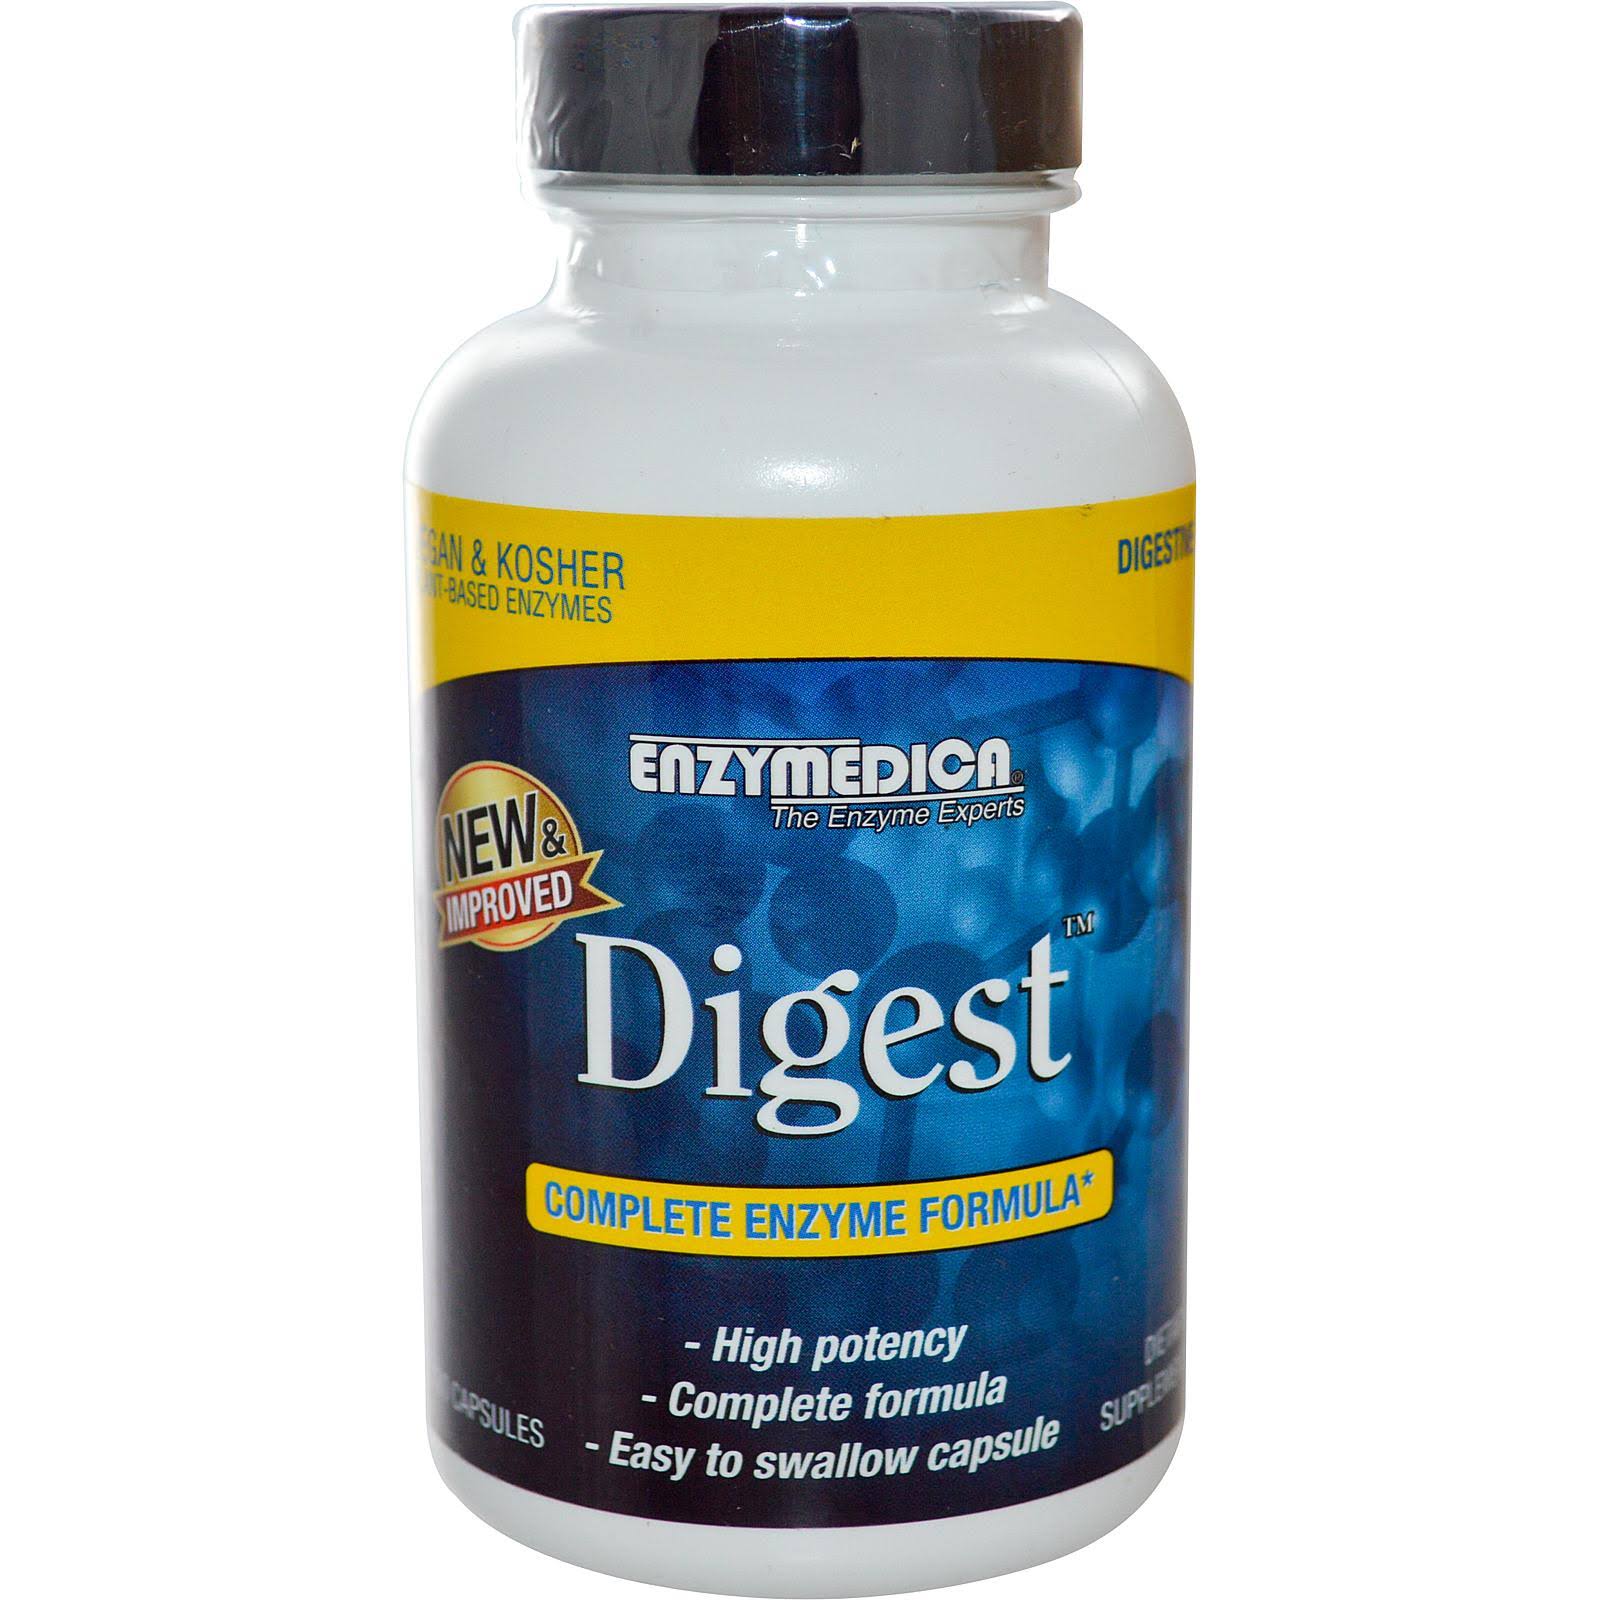 Enzymedica Digest Complete Enzyme Formula - 180 Capsules